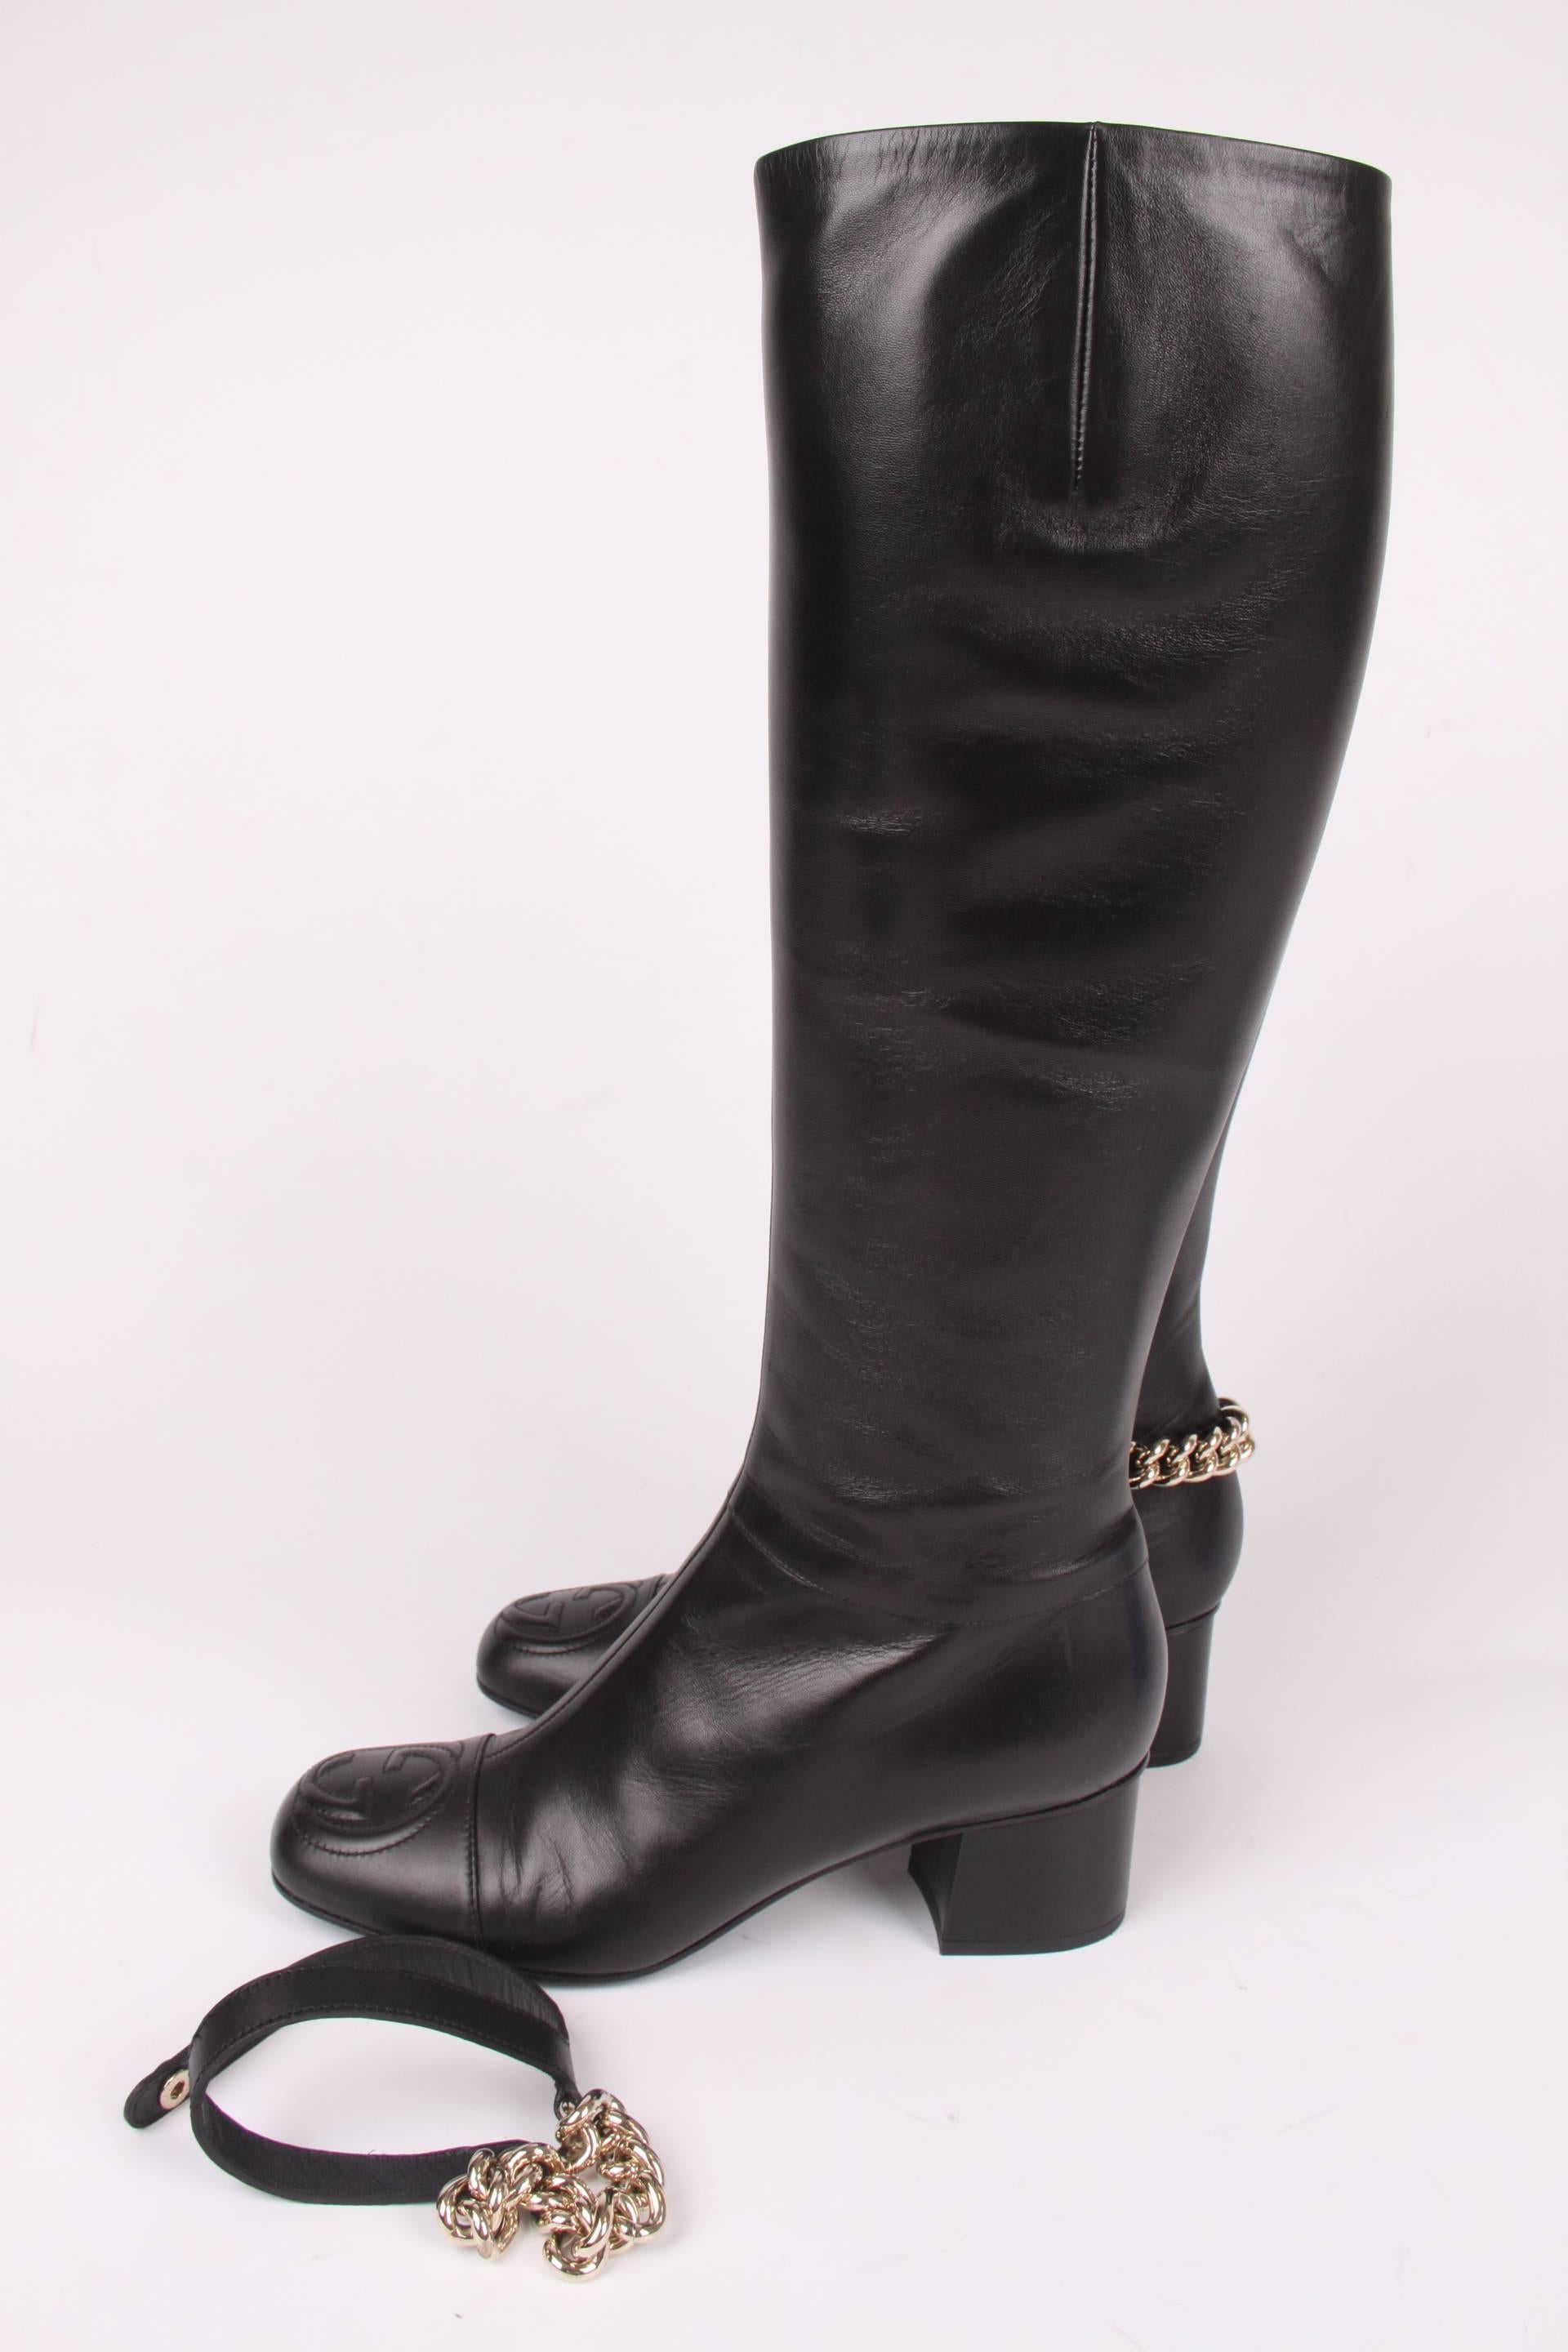 These are real beauties! Black leather Gucci boots with the name Lifford Malaga.

A sturdy block heel that measures 5,5 centimeters and a slightly square toe with an embroidered GG logo. The shaft measures 42 centimeters and has a long